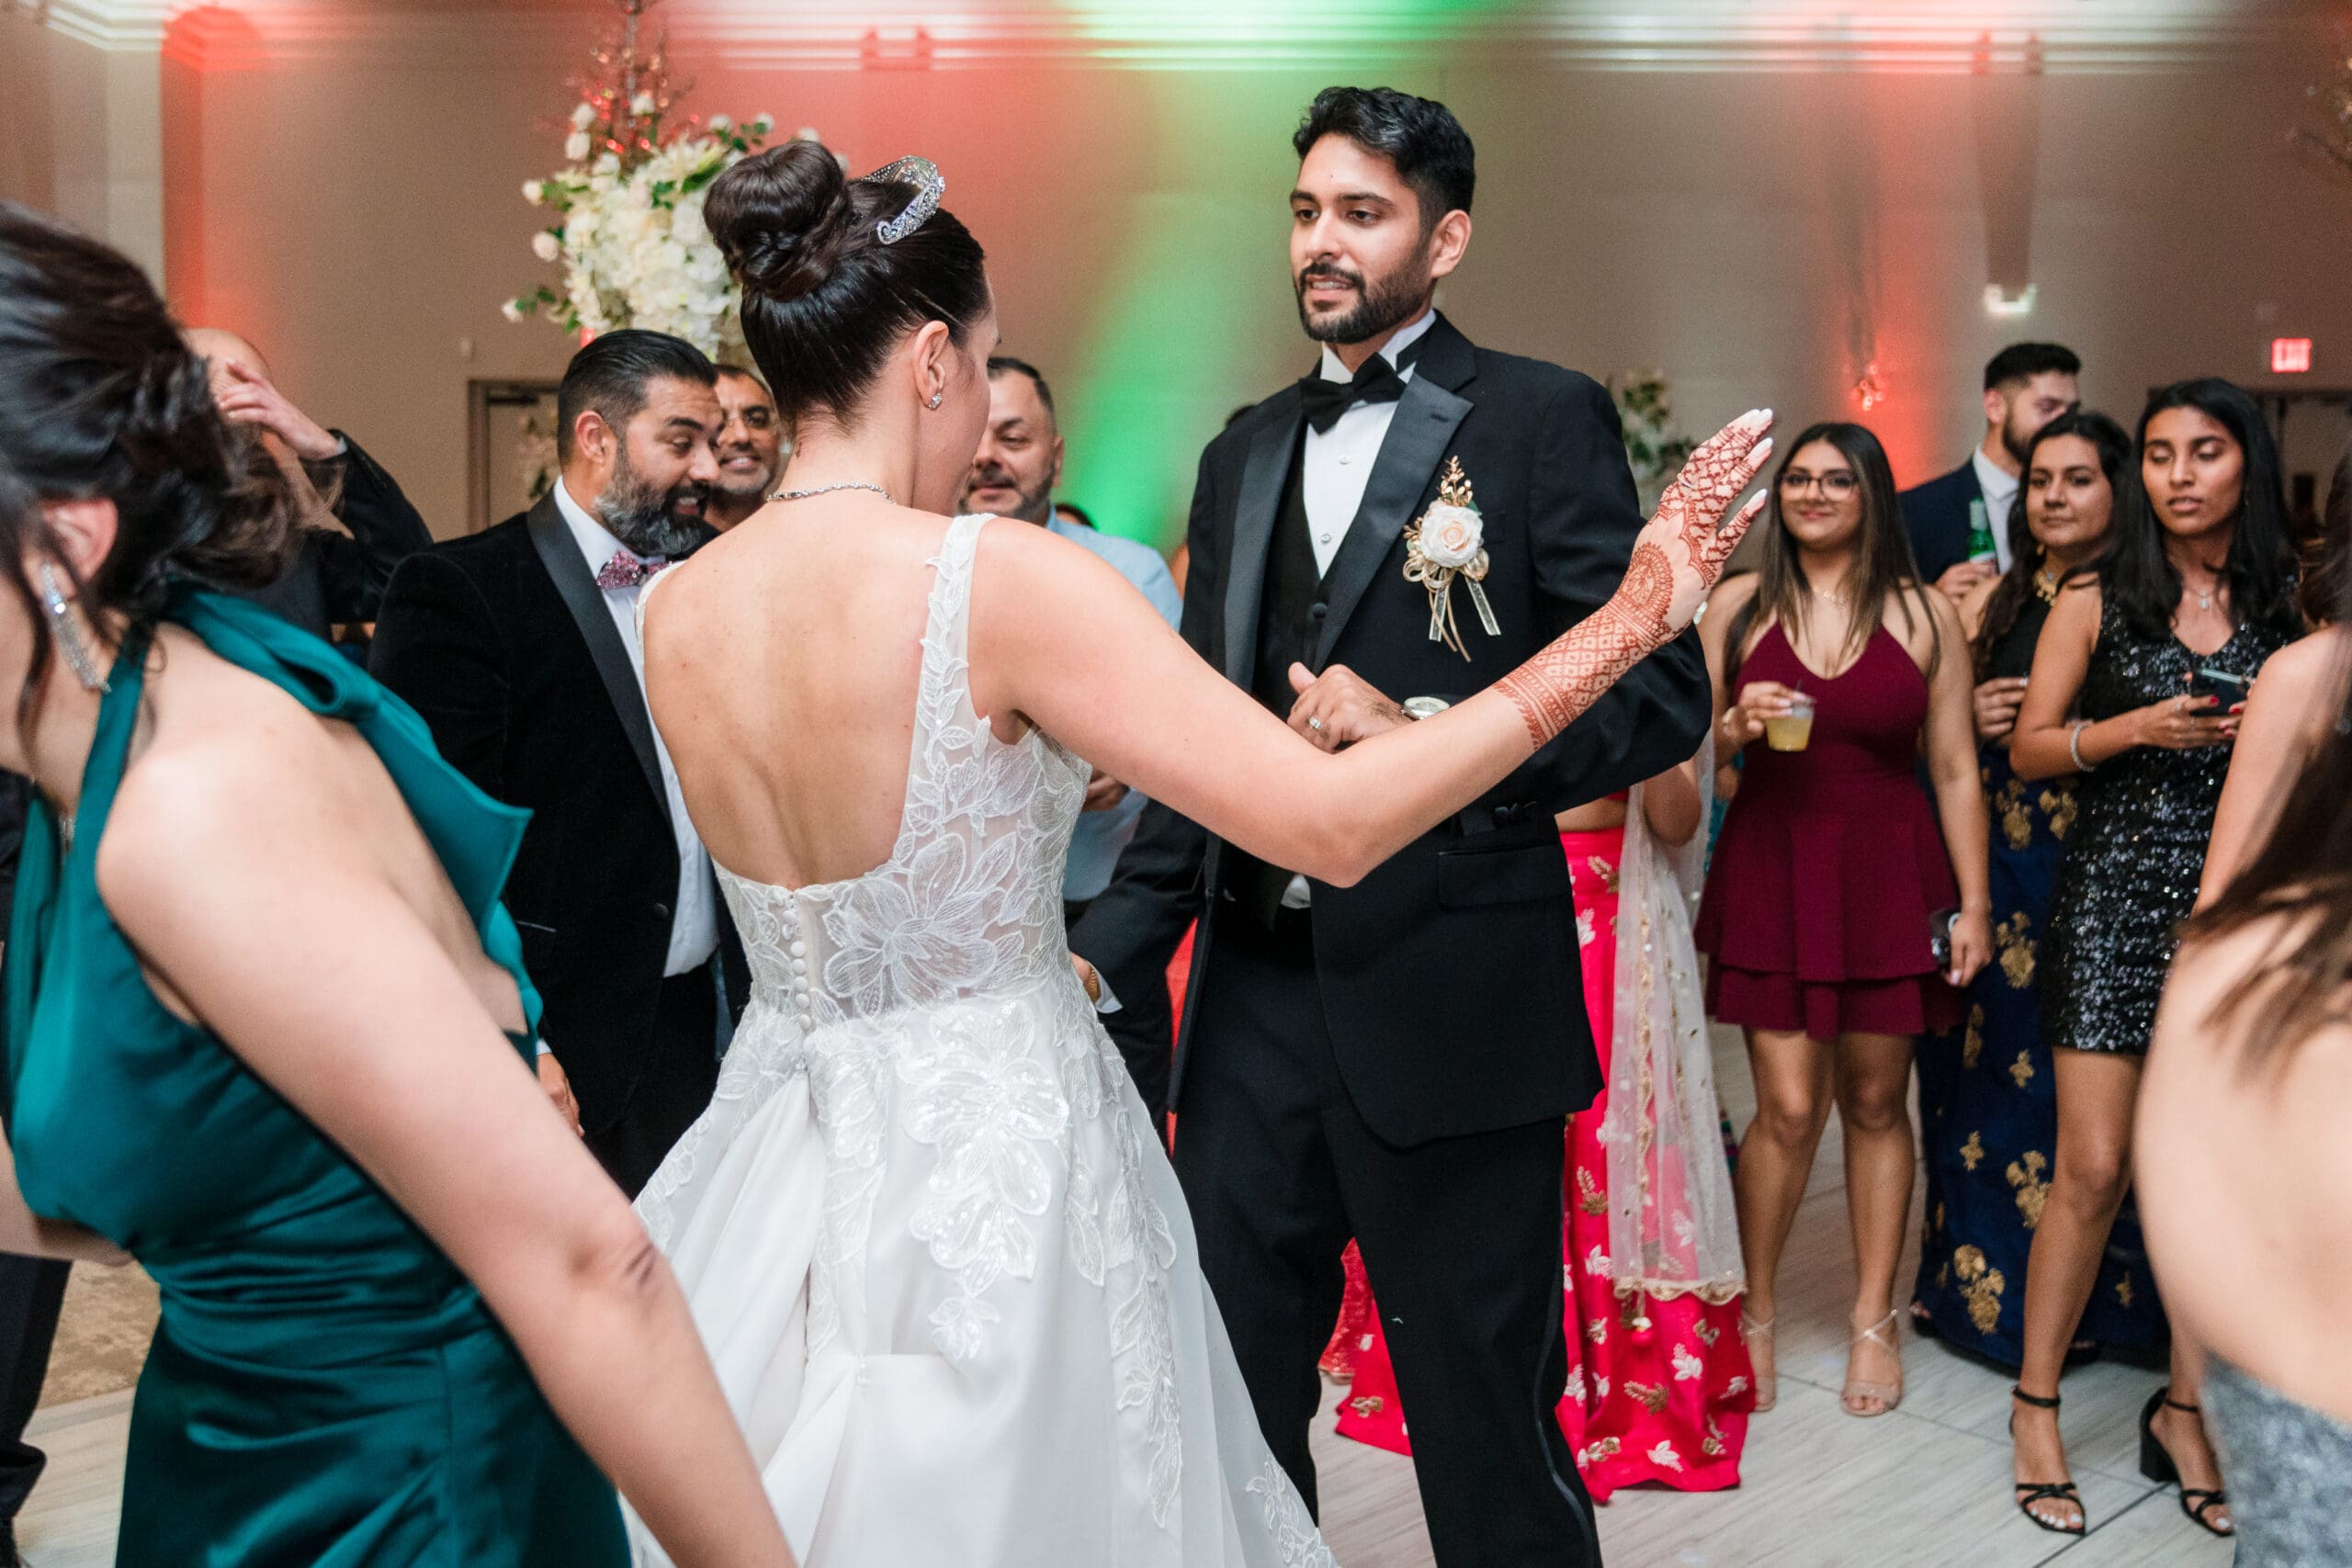 Newlyweds dancing on the dance floor surrounded by guests at Holy Trinity Reception Center